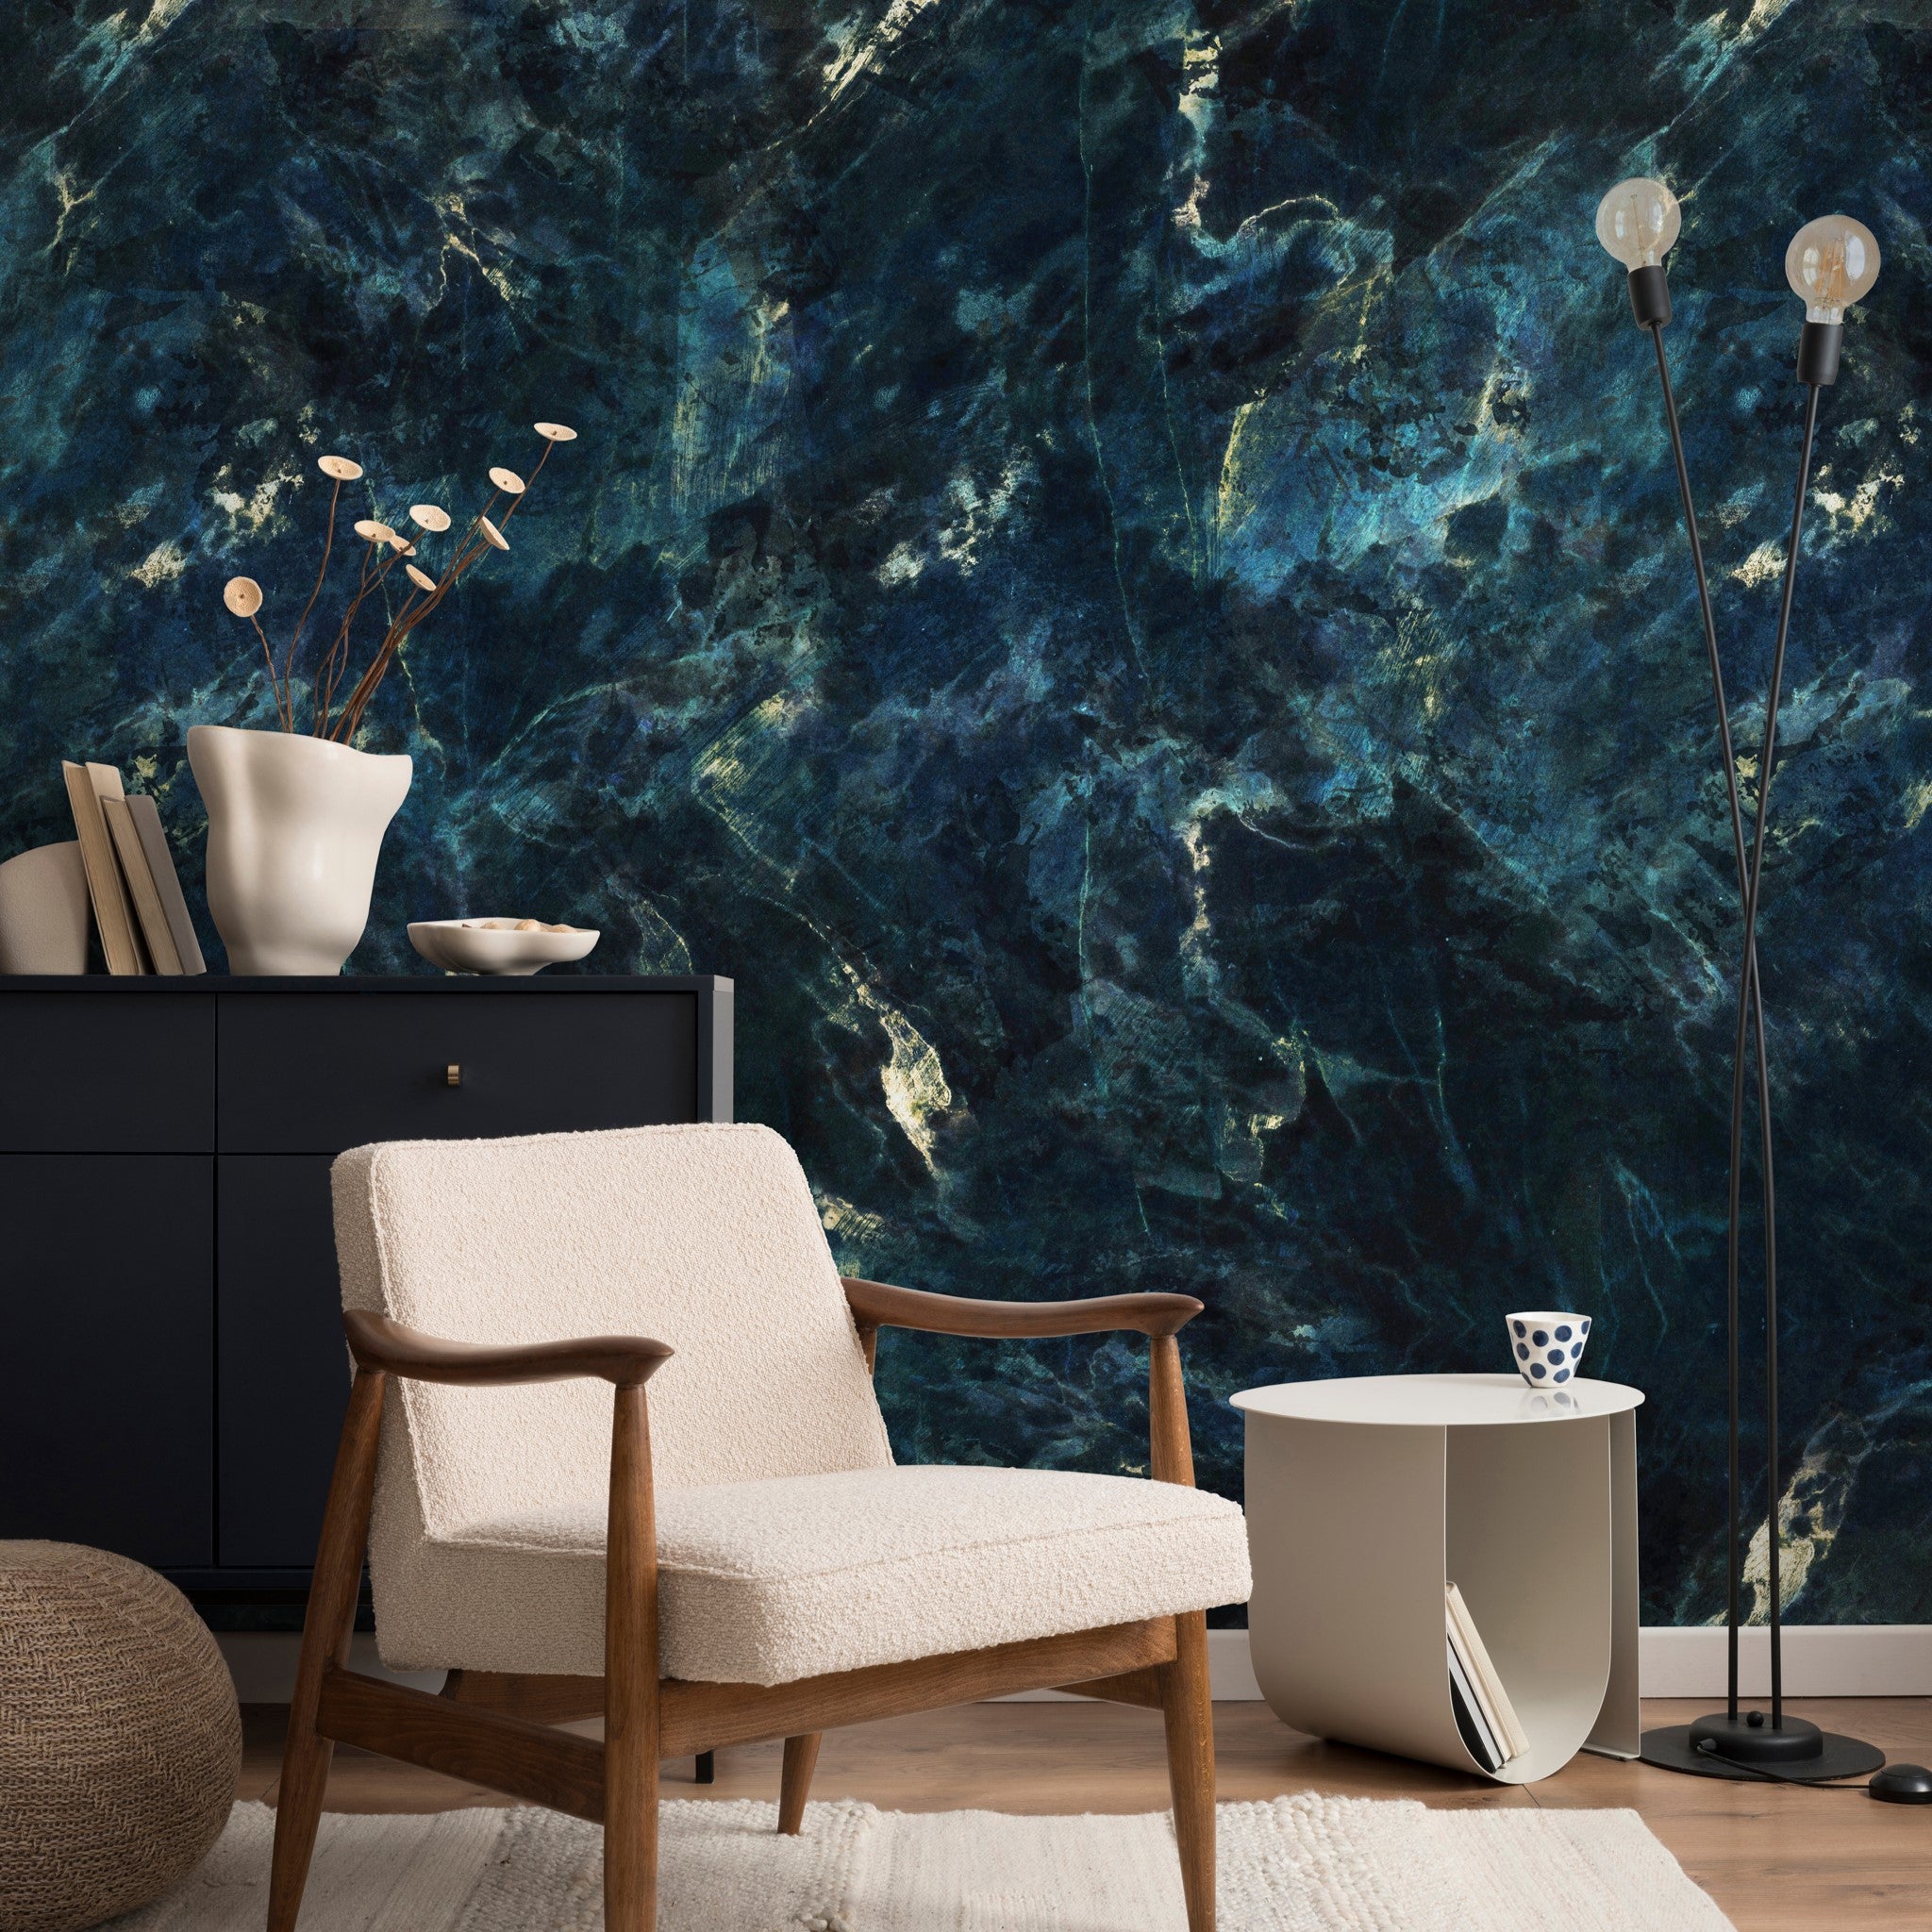 "Baudelaire Wallpaper by Wall Blush enhancing a modern living room's aesthetic with deep blue textured design."